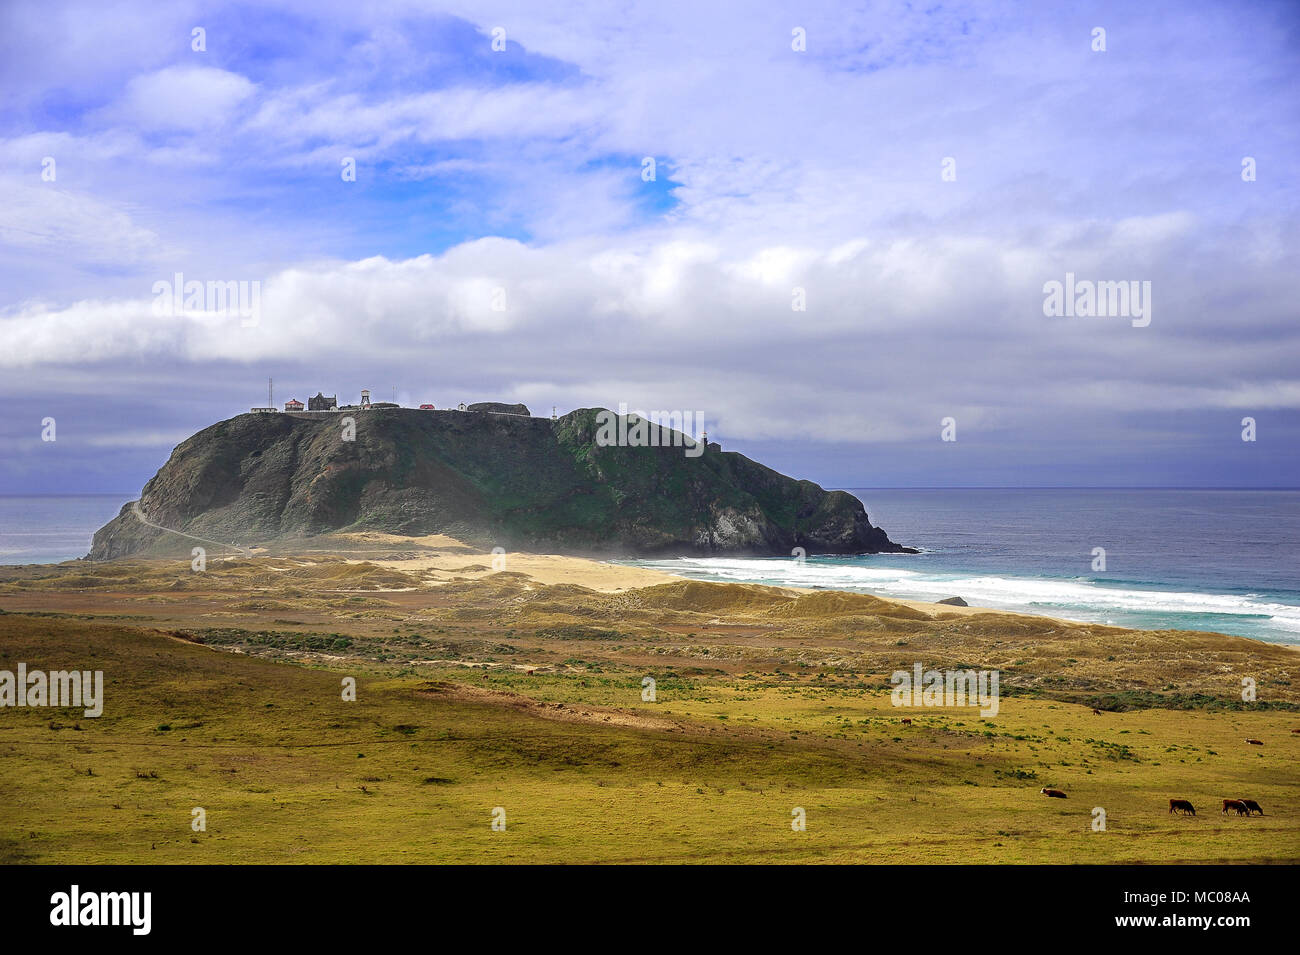 Picturesque scene of Point Sur Lighthouse from Cabrillo highway with green, grassy foreground, turquoise seas  and cloudy sky Stock Photo